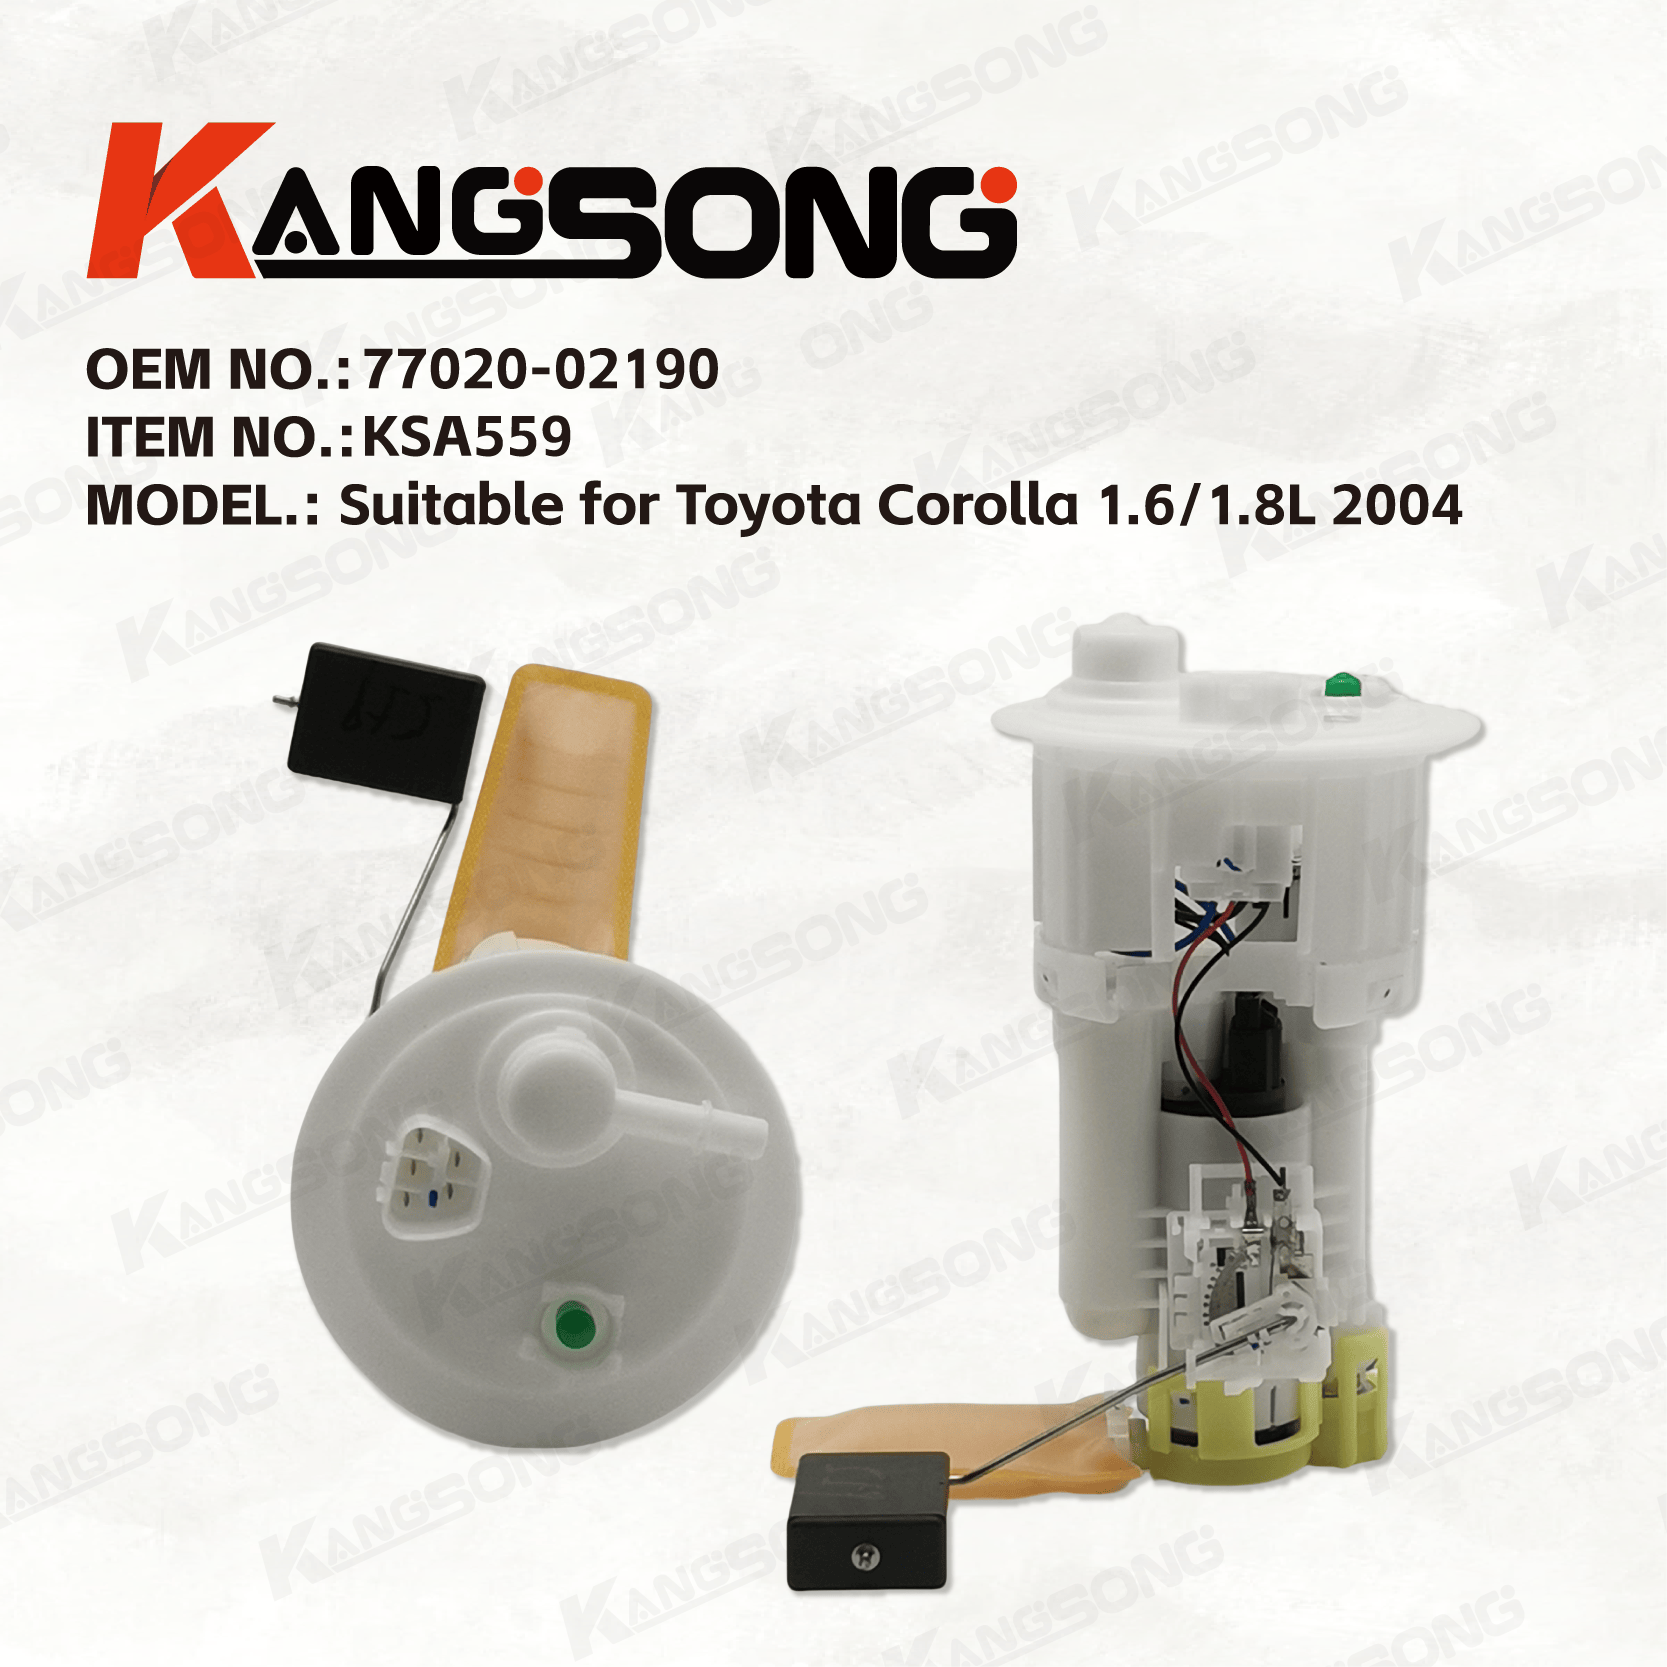 Applicable to Toyota Corolla 1.6/1.8L 2004/77020-12530 77020-02190/Fuel Pump Assembly/KS-A559